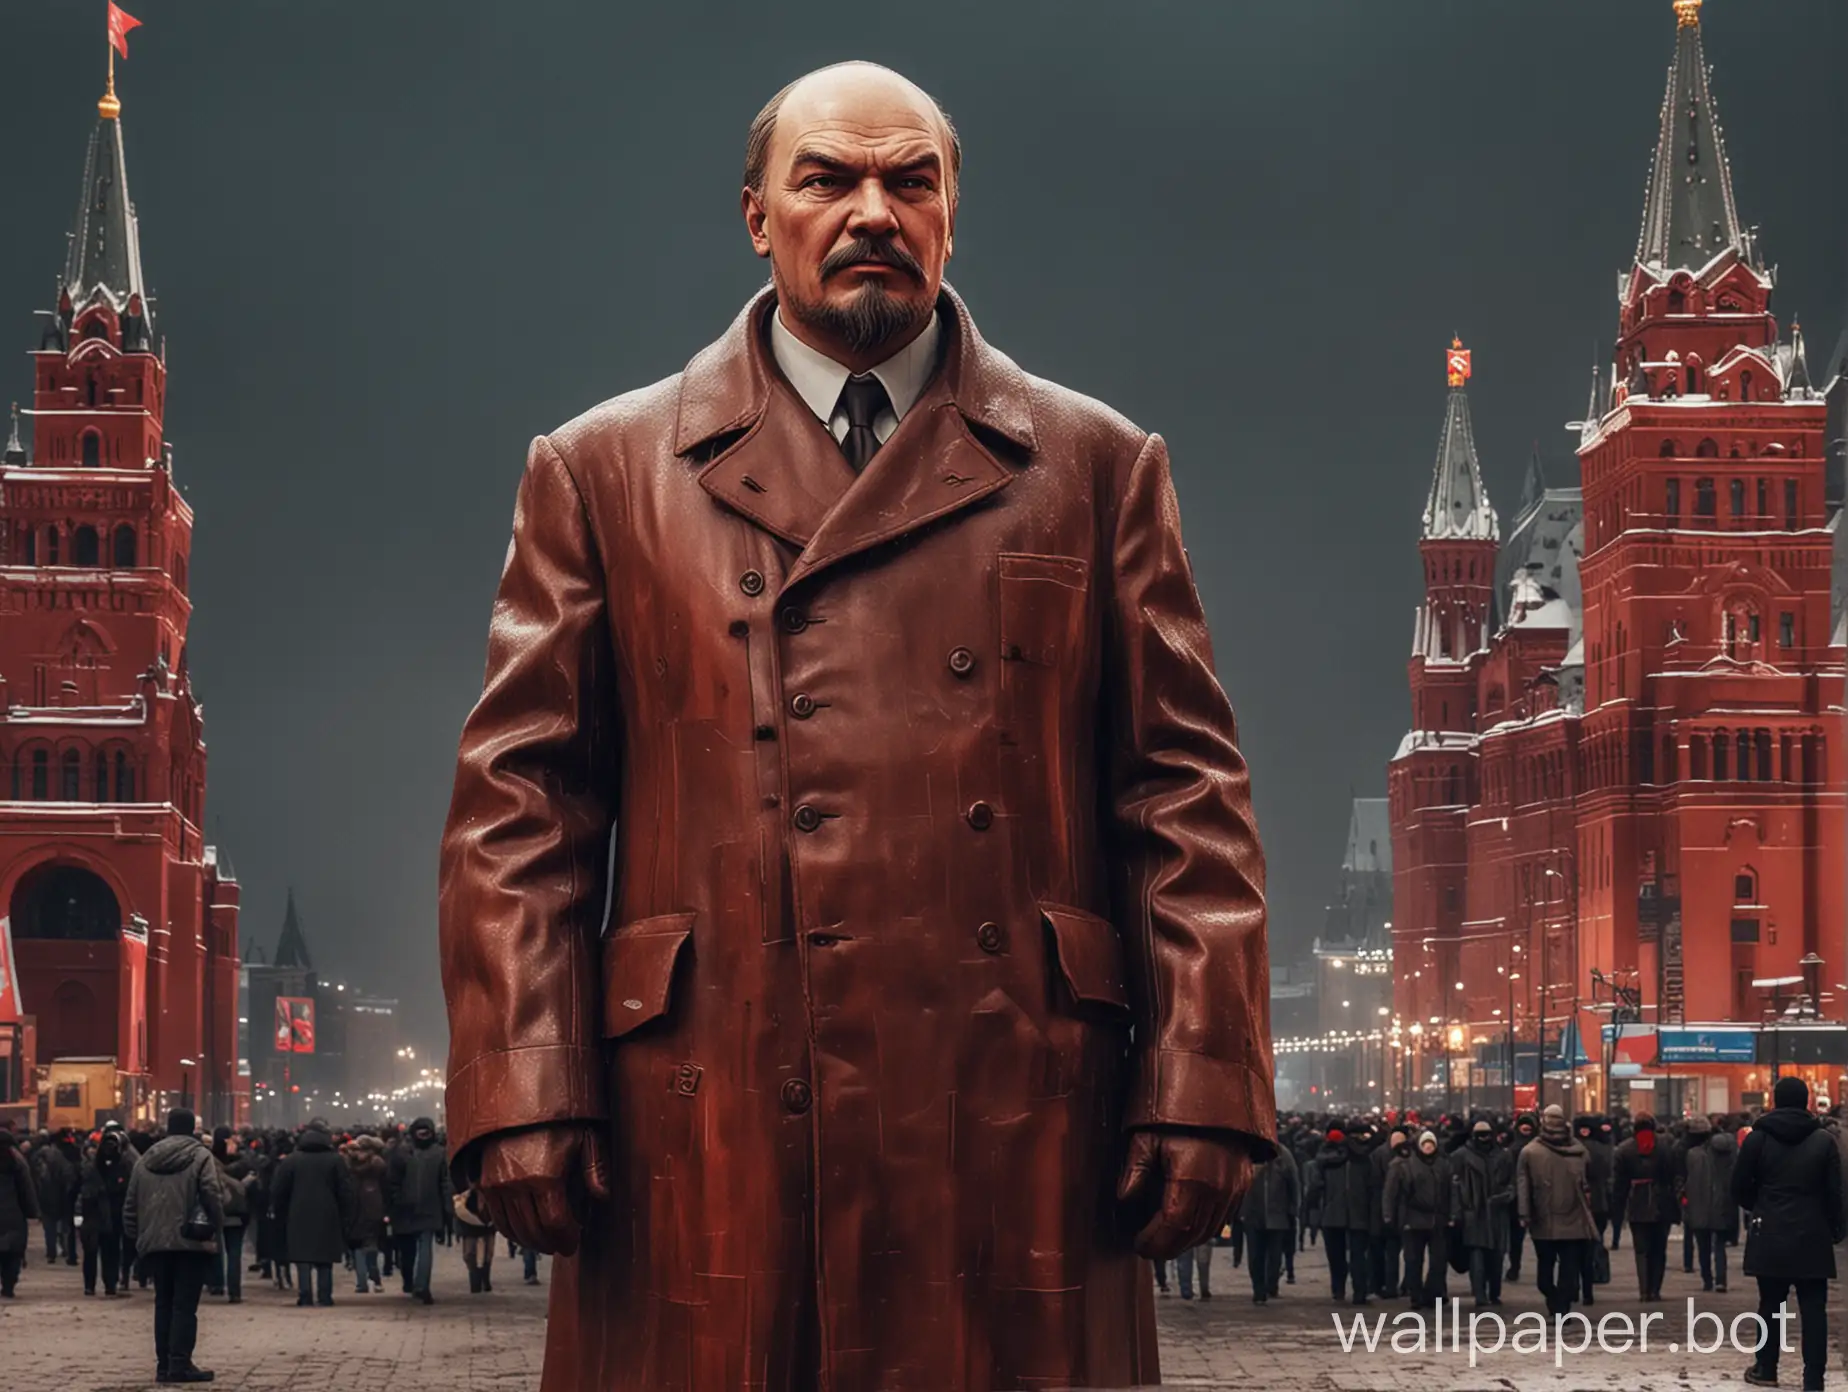 Lenin on a bronivik in cyberpunk style on Red Square